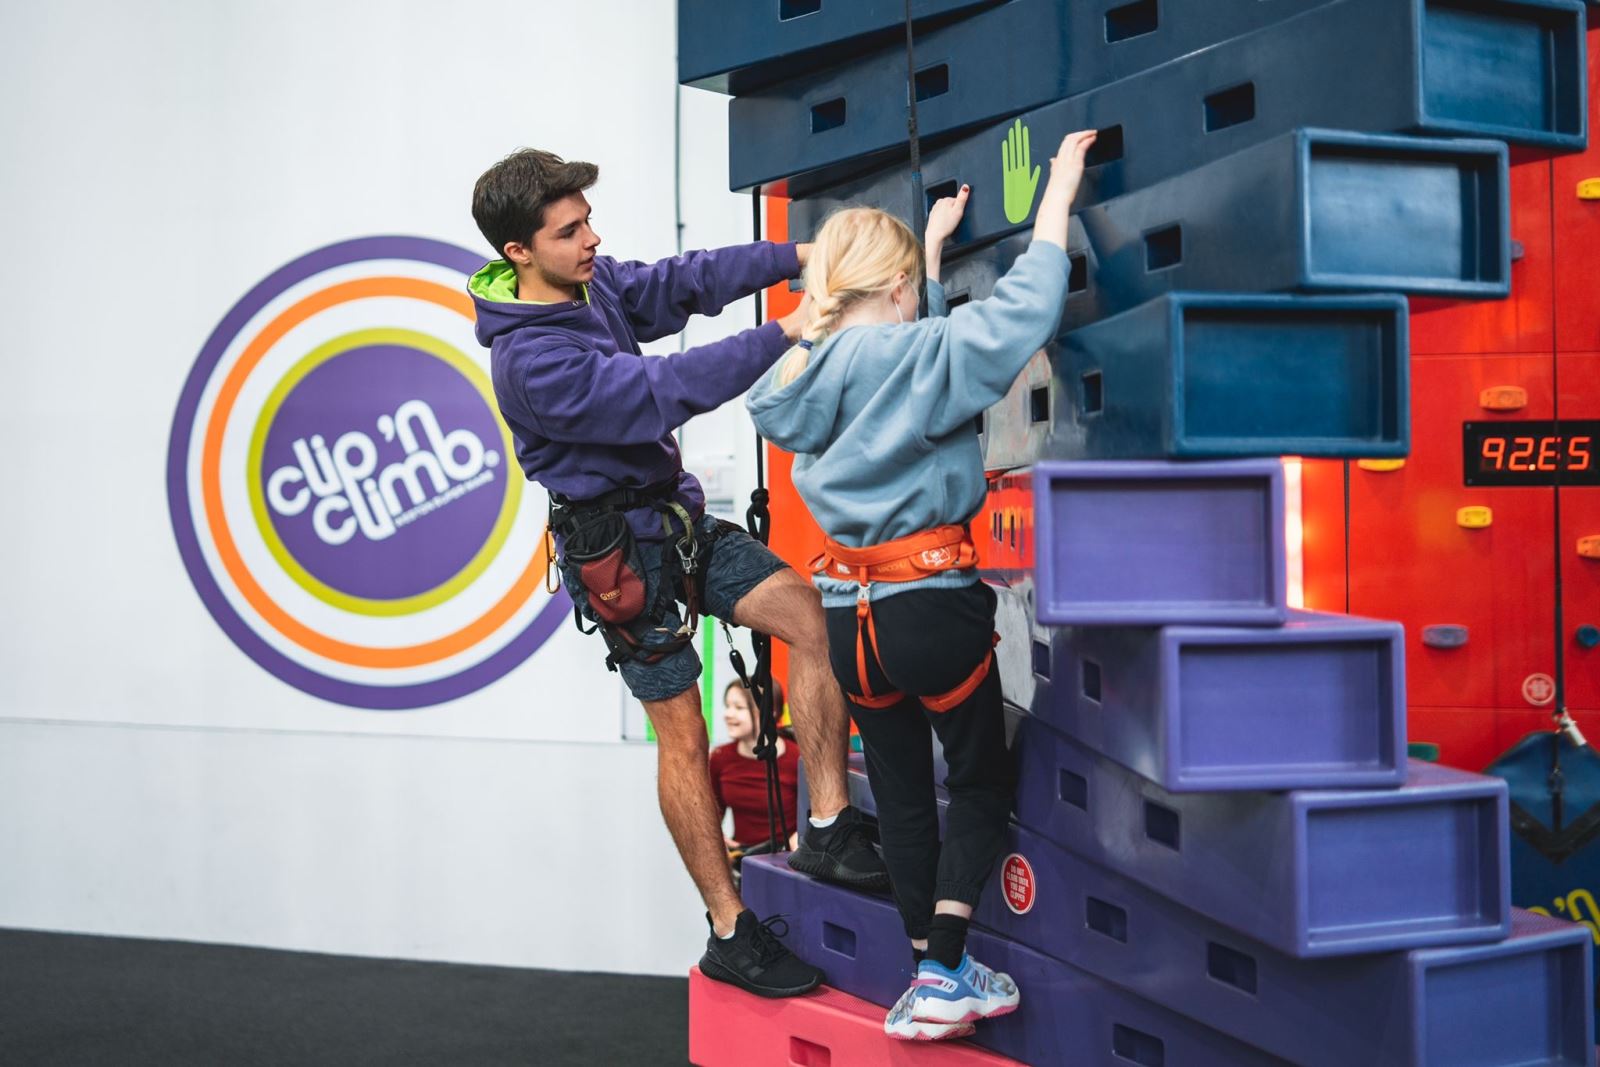 An instructor shows a child how to climb an indoor climbing wall